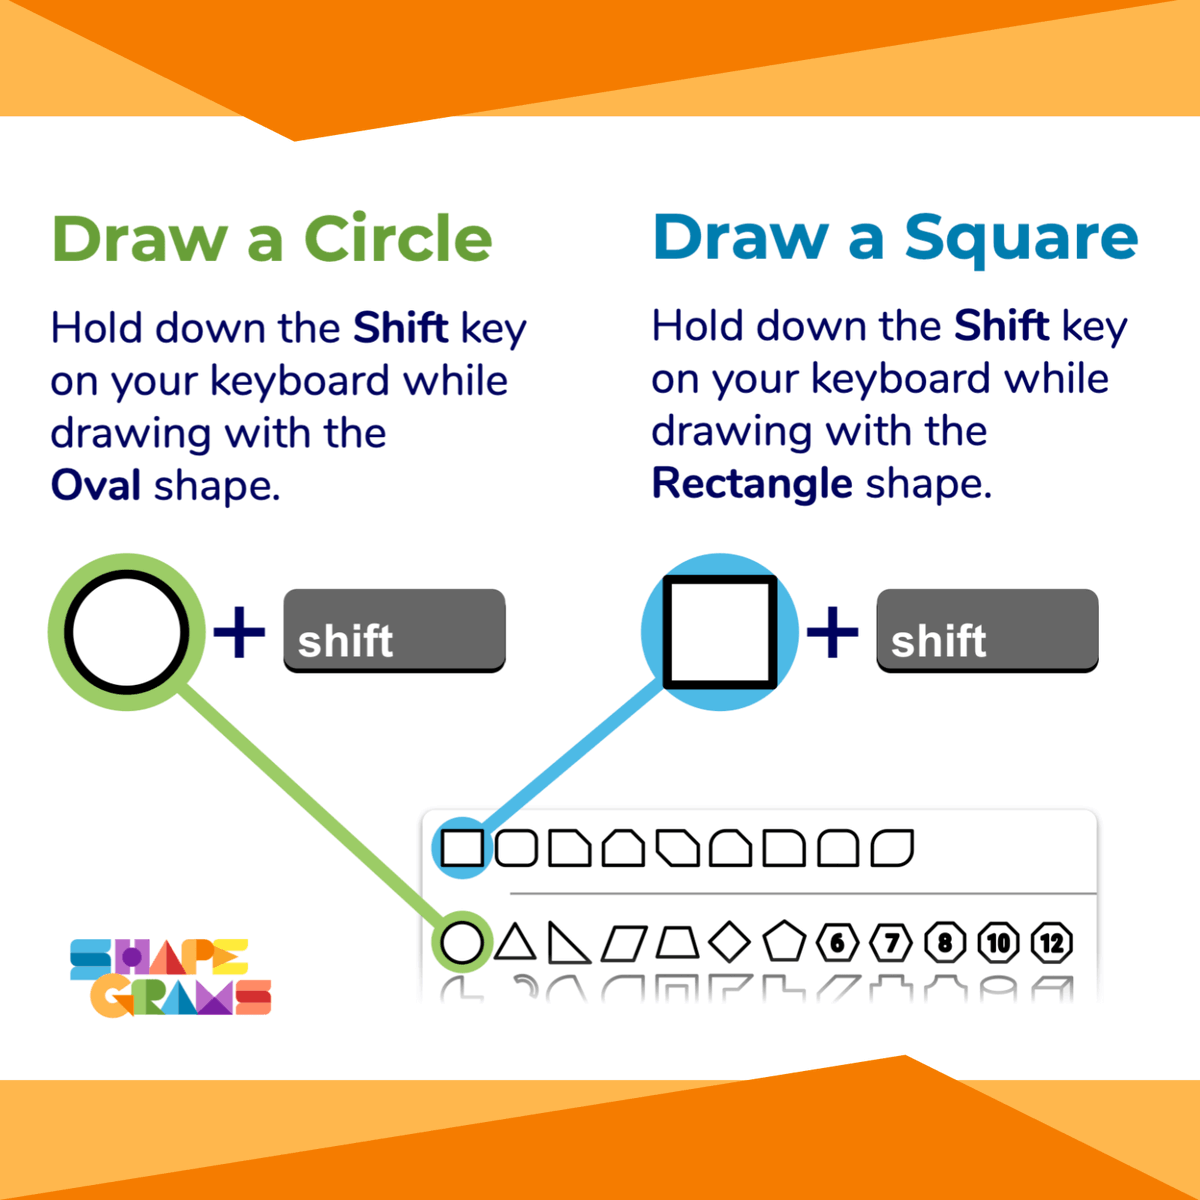 Holding down Shift is KEY to drawing circles and squares.

P.S. Hold down Shift as you drag a corner to resize so that the shape stays a circle or square.